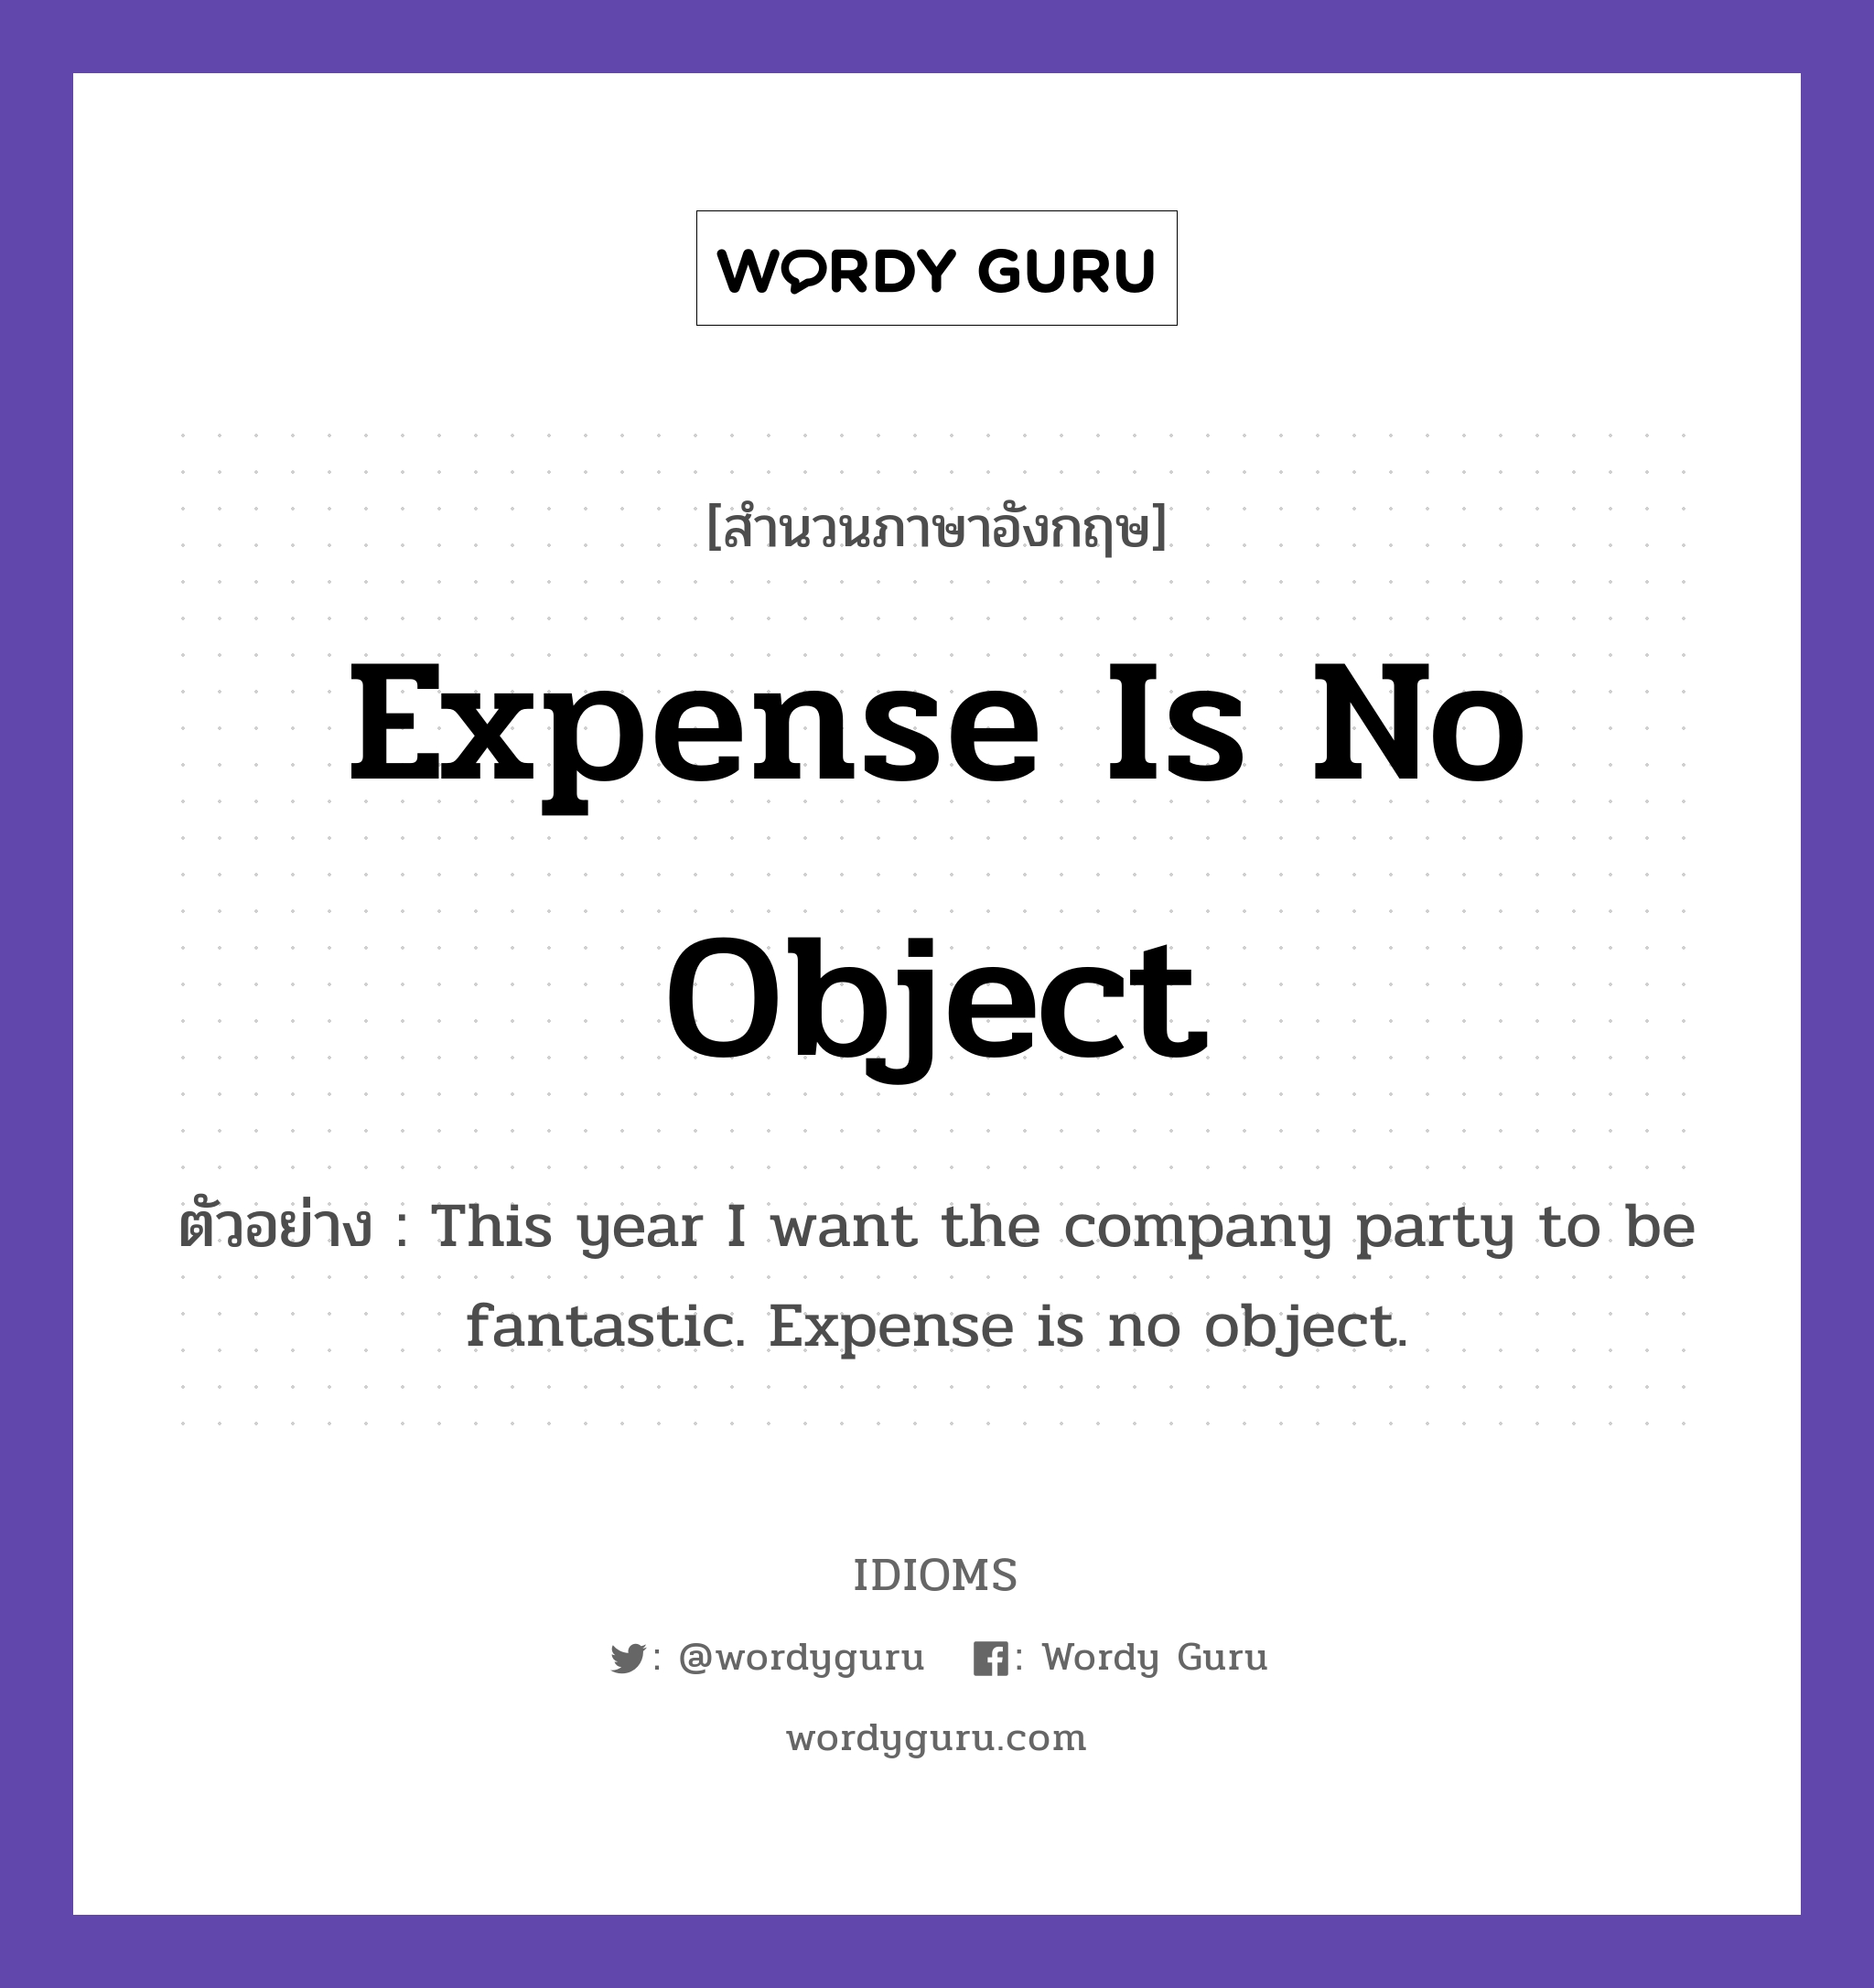 Expense Is No Object แปลว่า?, สำนวนภาษาอังกฤษ Expense Is No Object ตัวอย่าง This year I want the company party to be fantastic. Expense is no object.